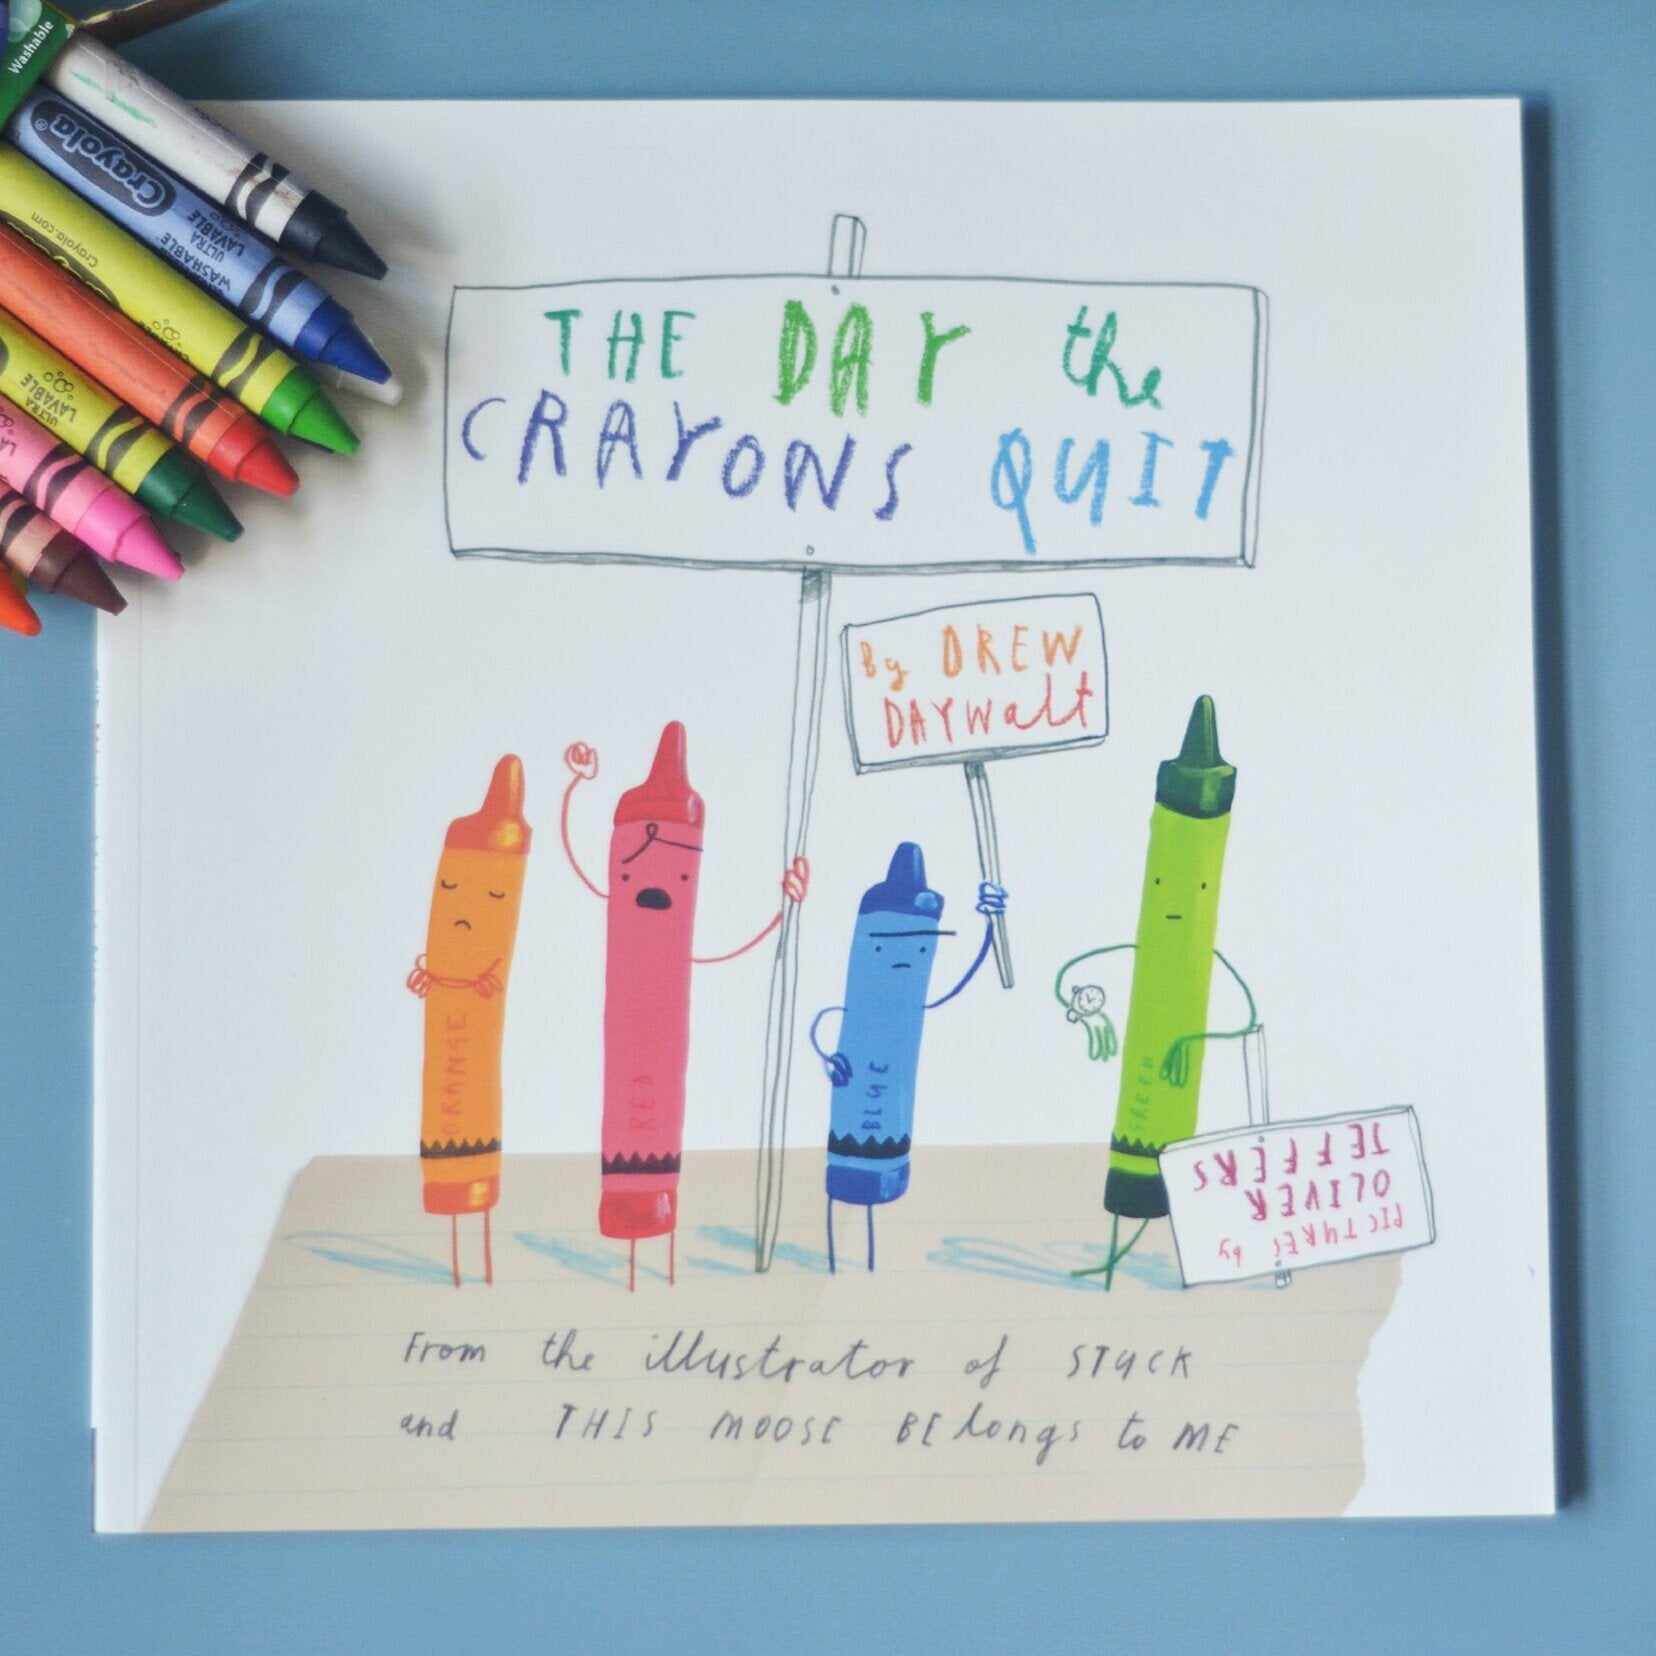 The Day The Crayons Quit by Drew Daywalt